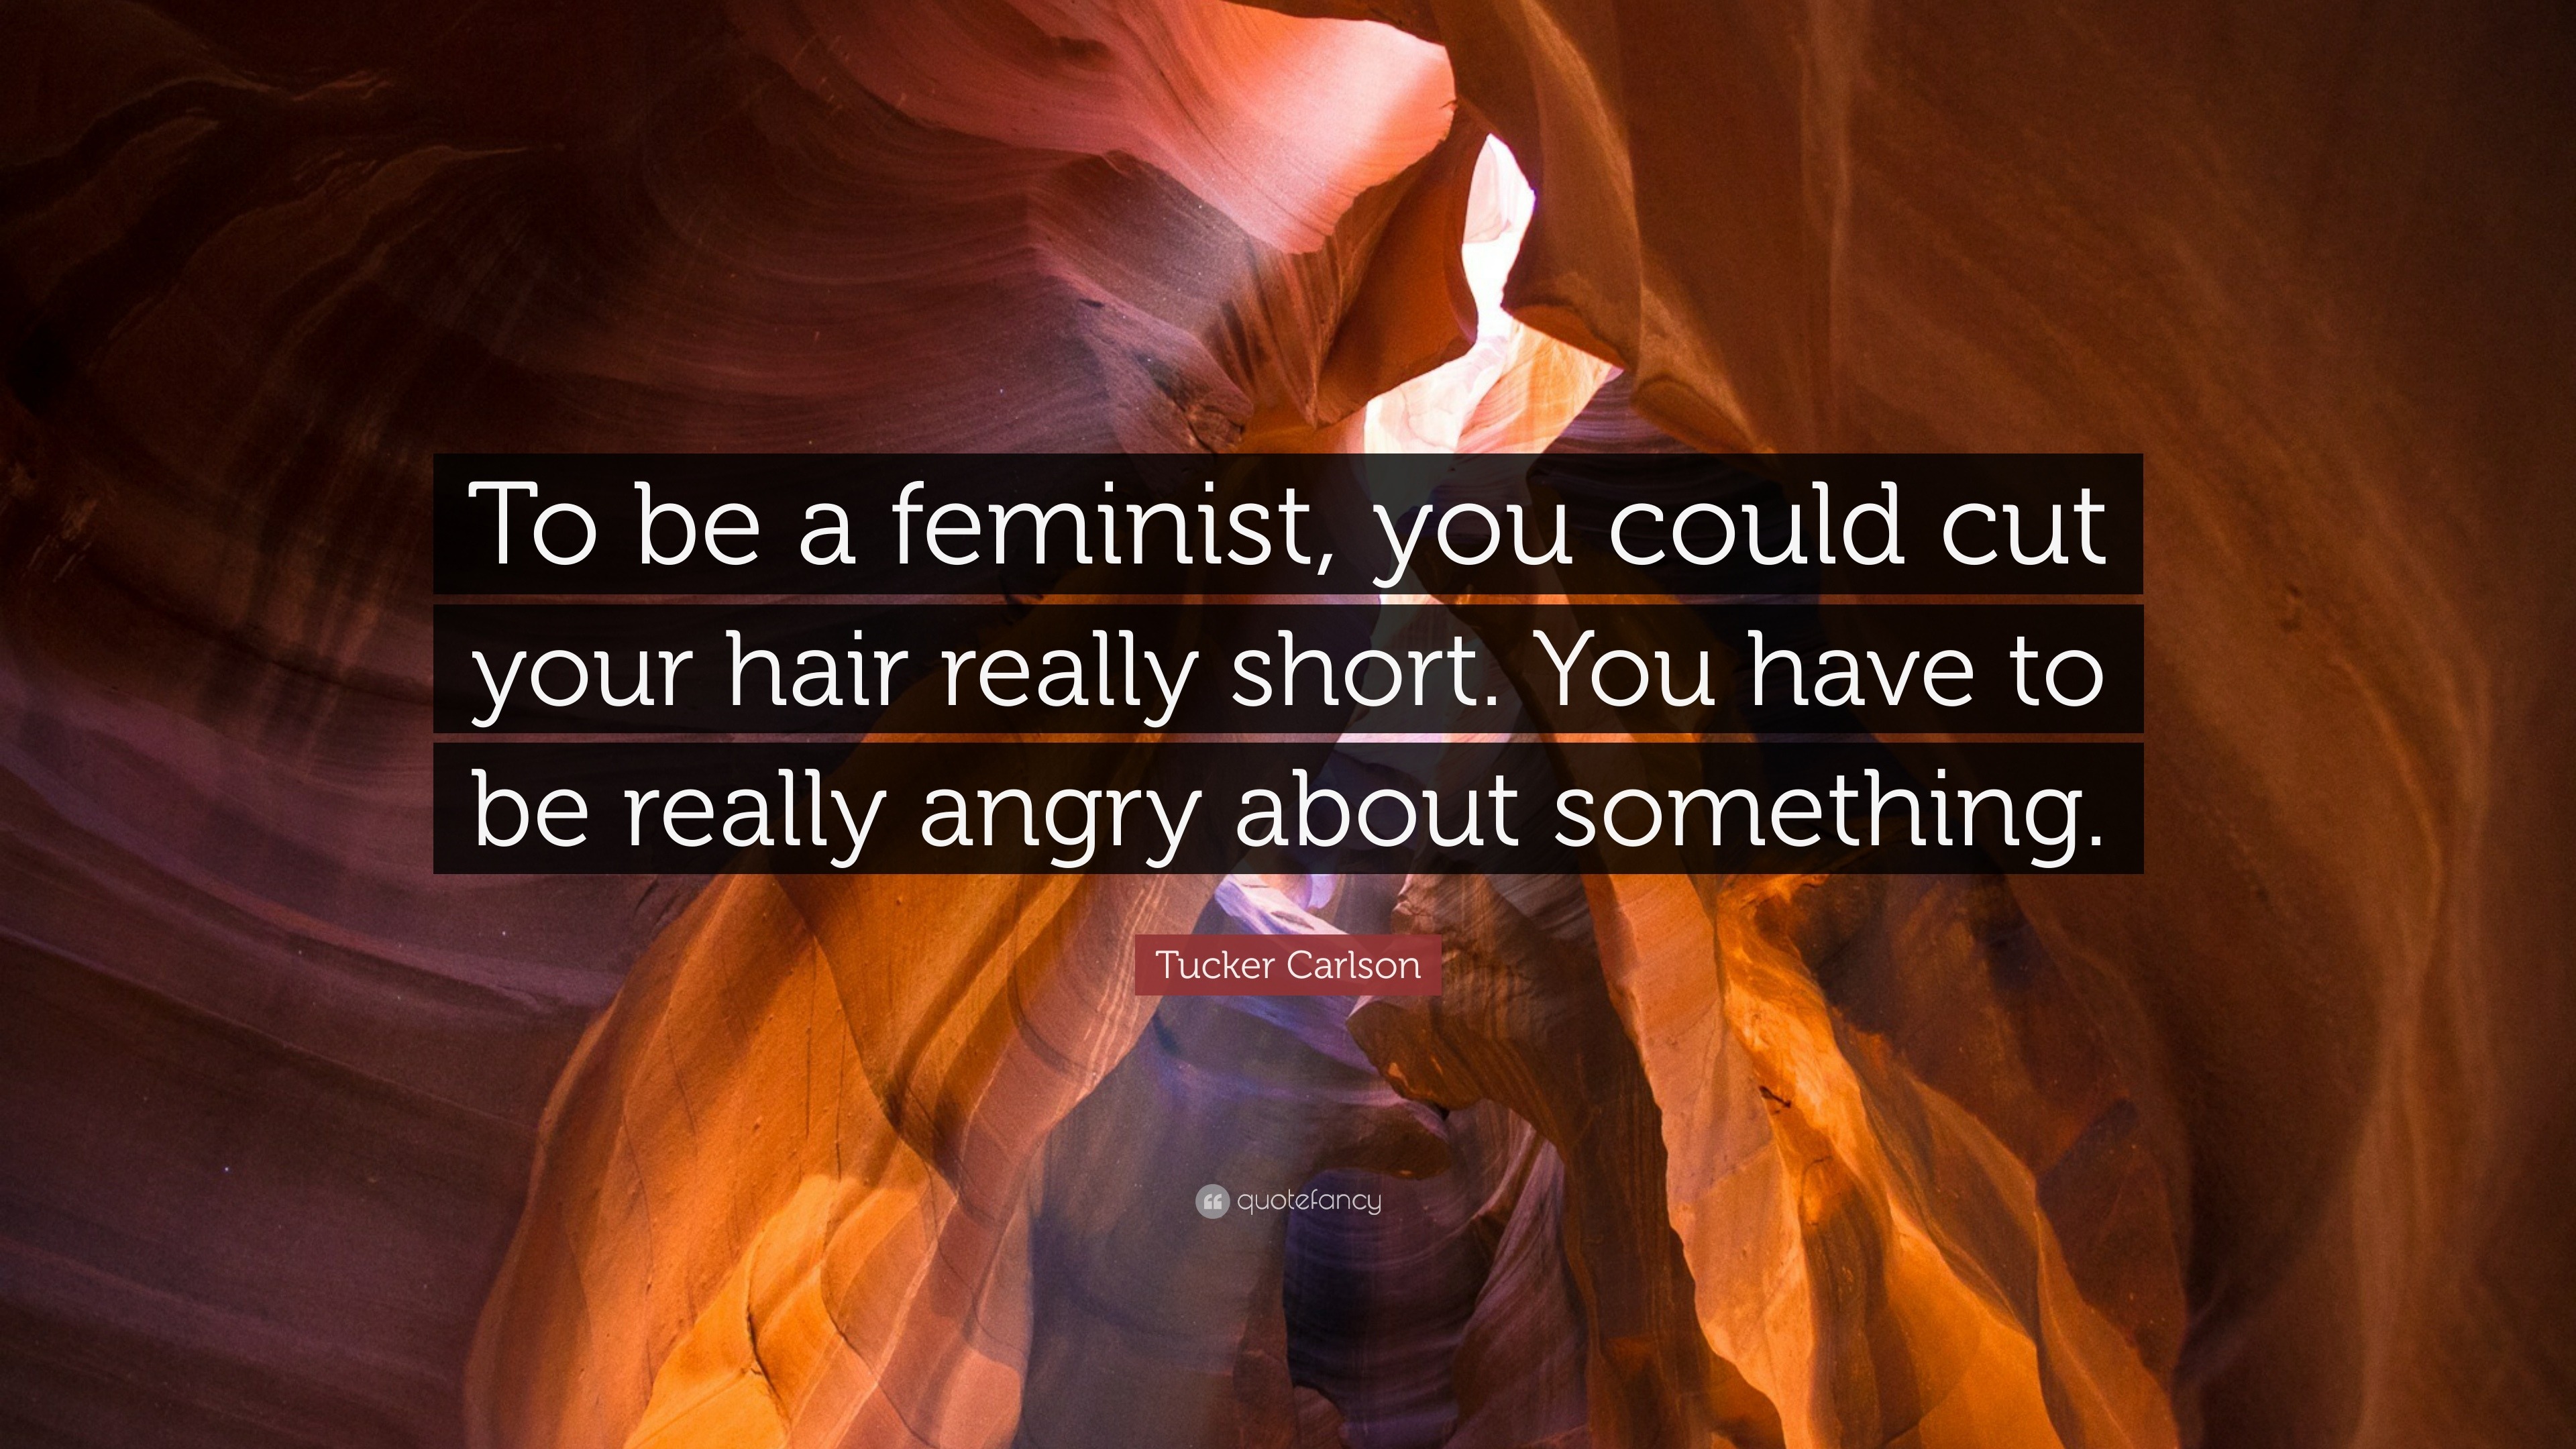 Tucker Carlson Quote: “To be a feminist, you could cut your hair really  short. You have